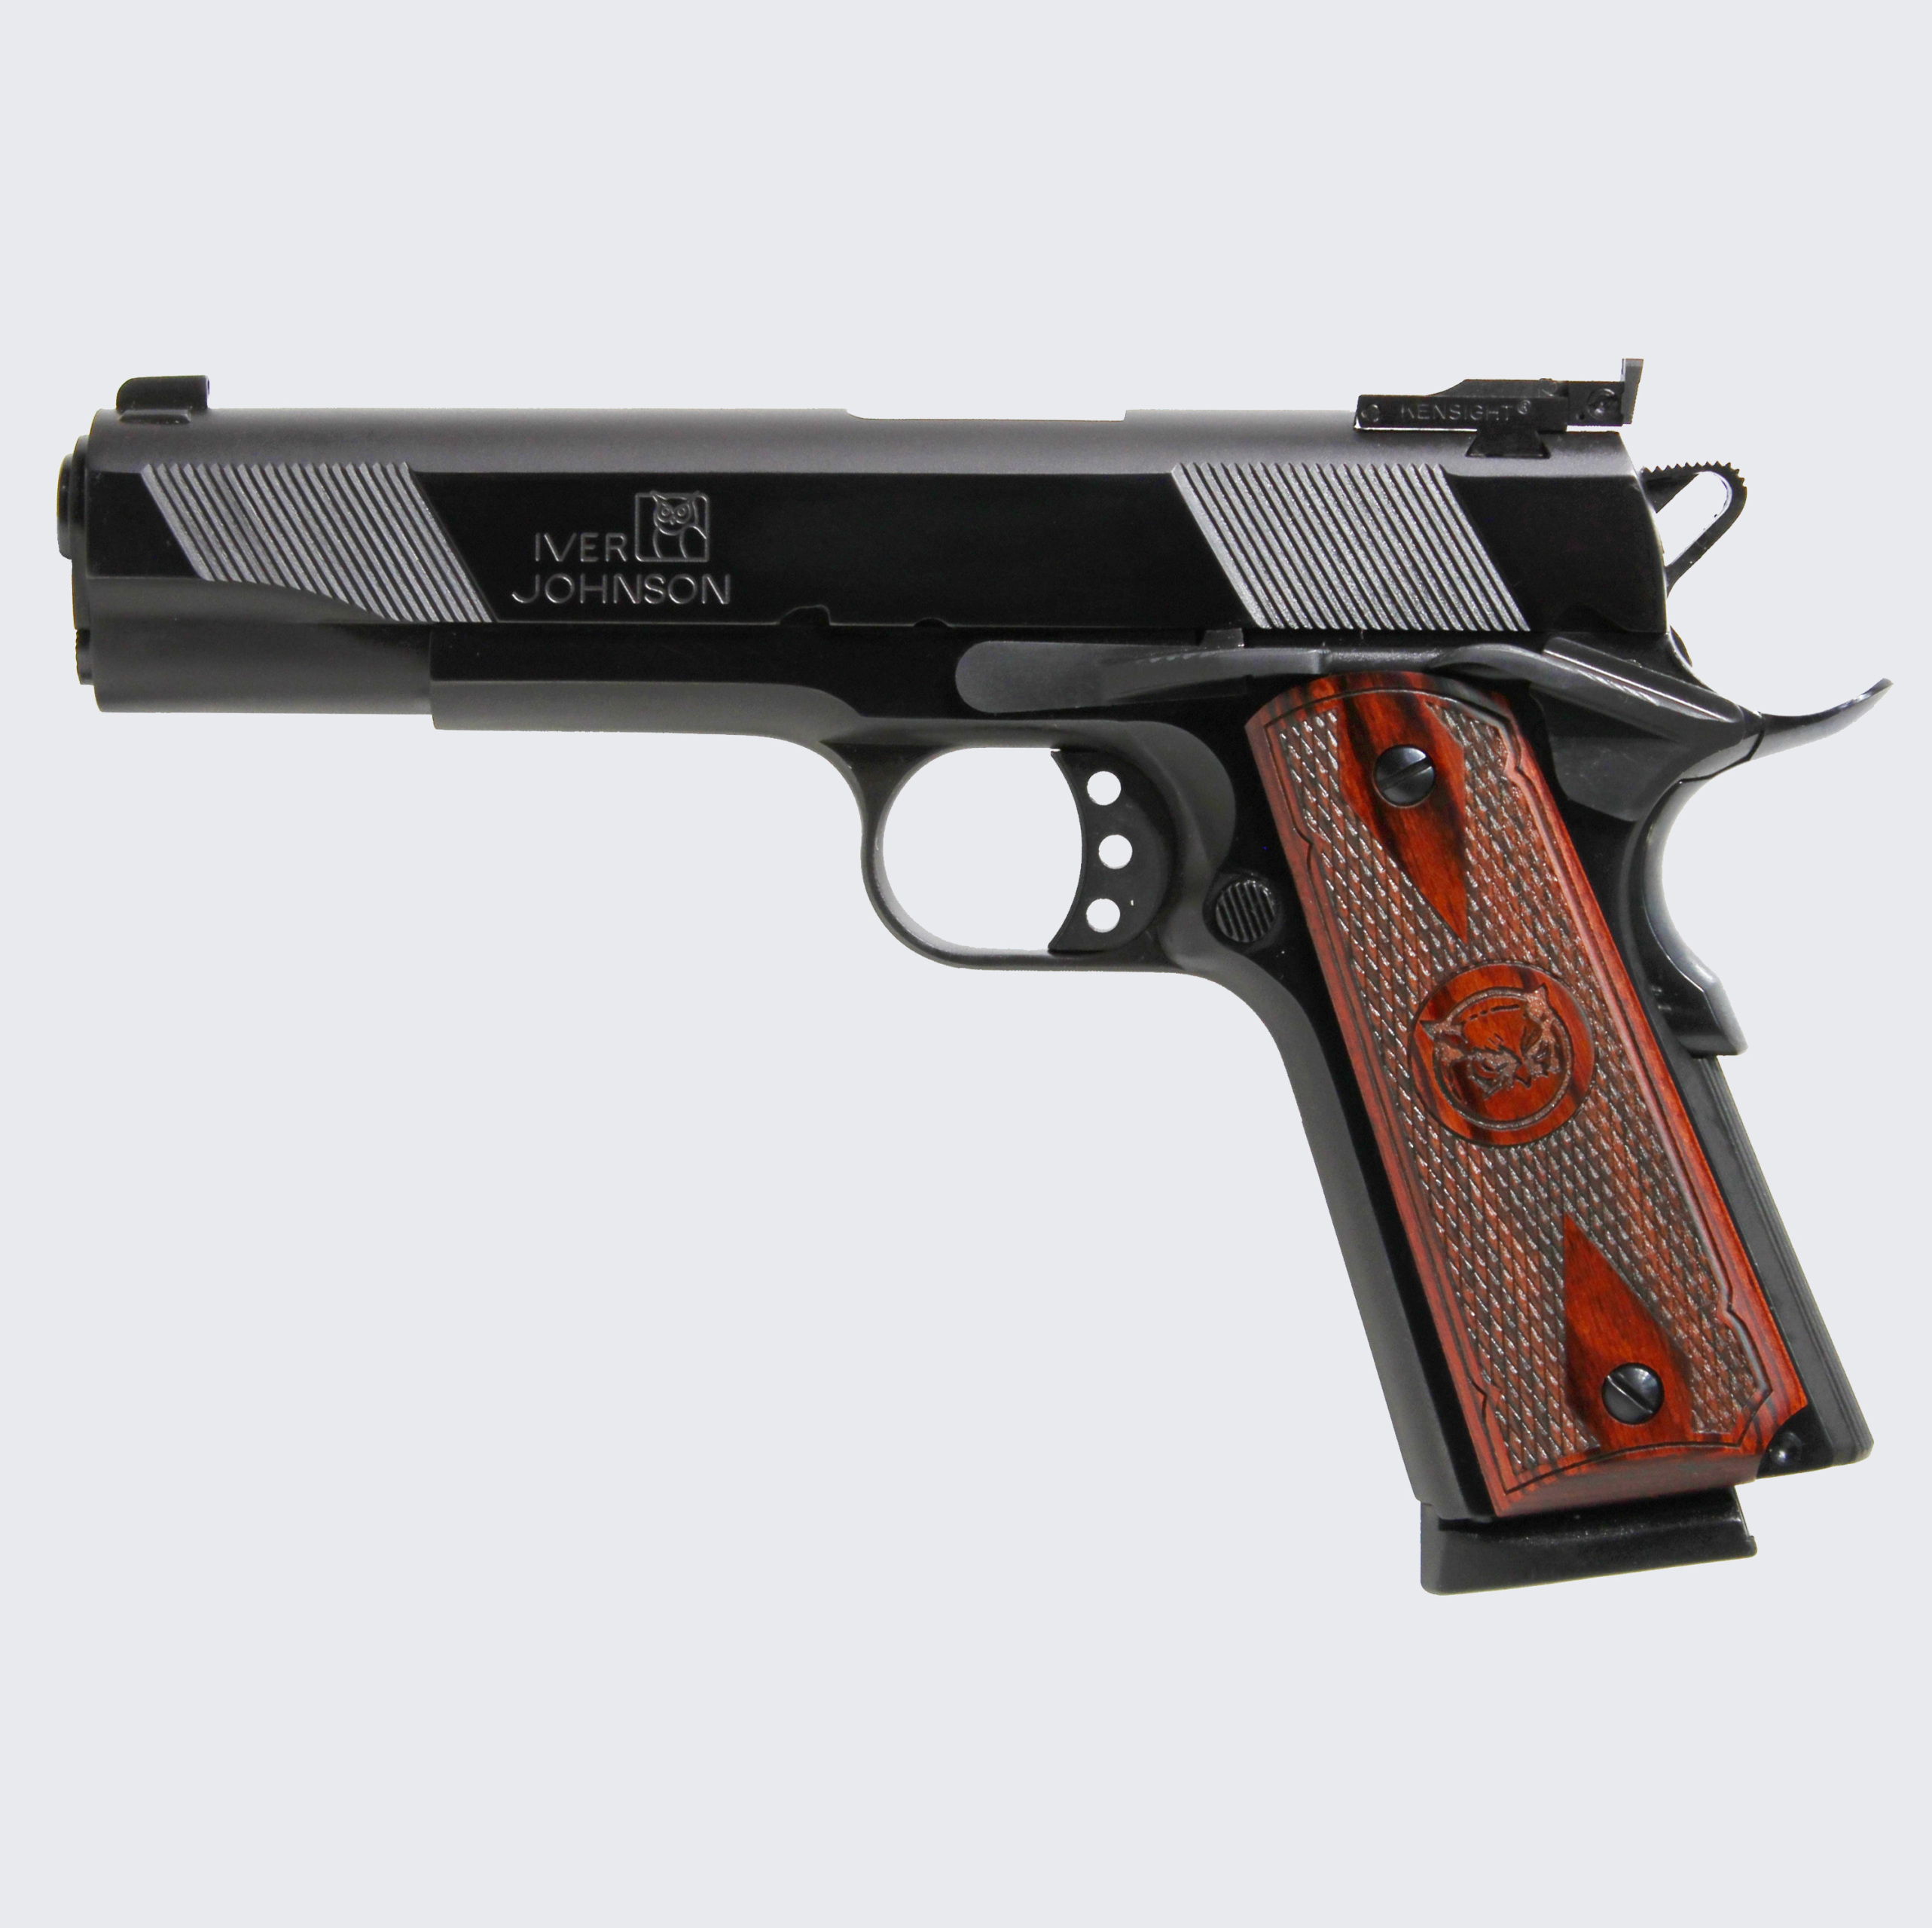 Iver johnson 1911 10mm review